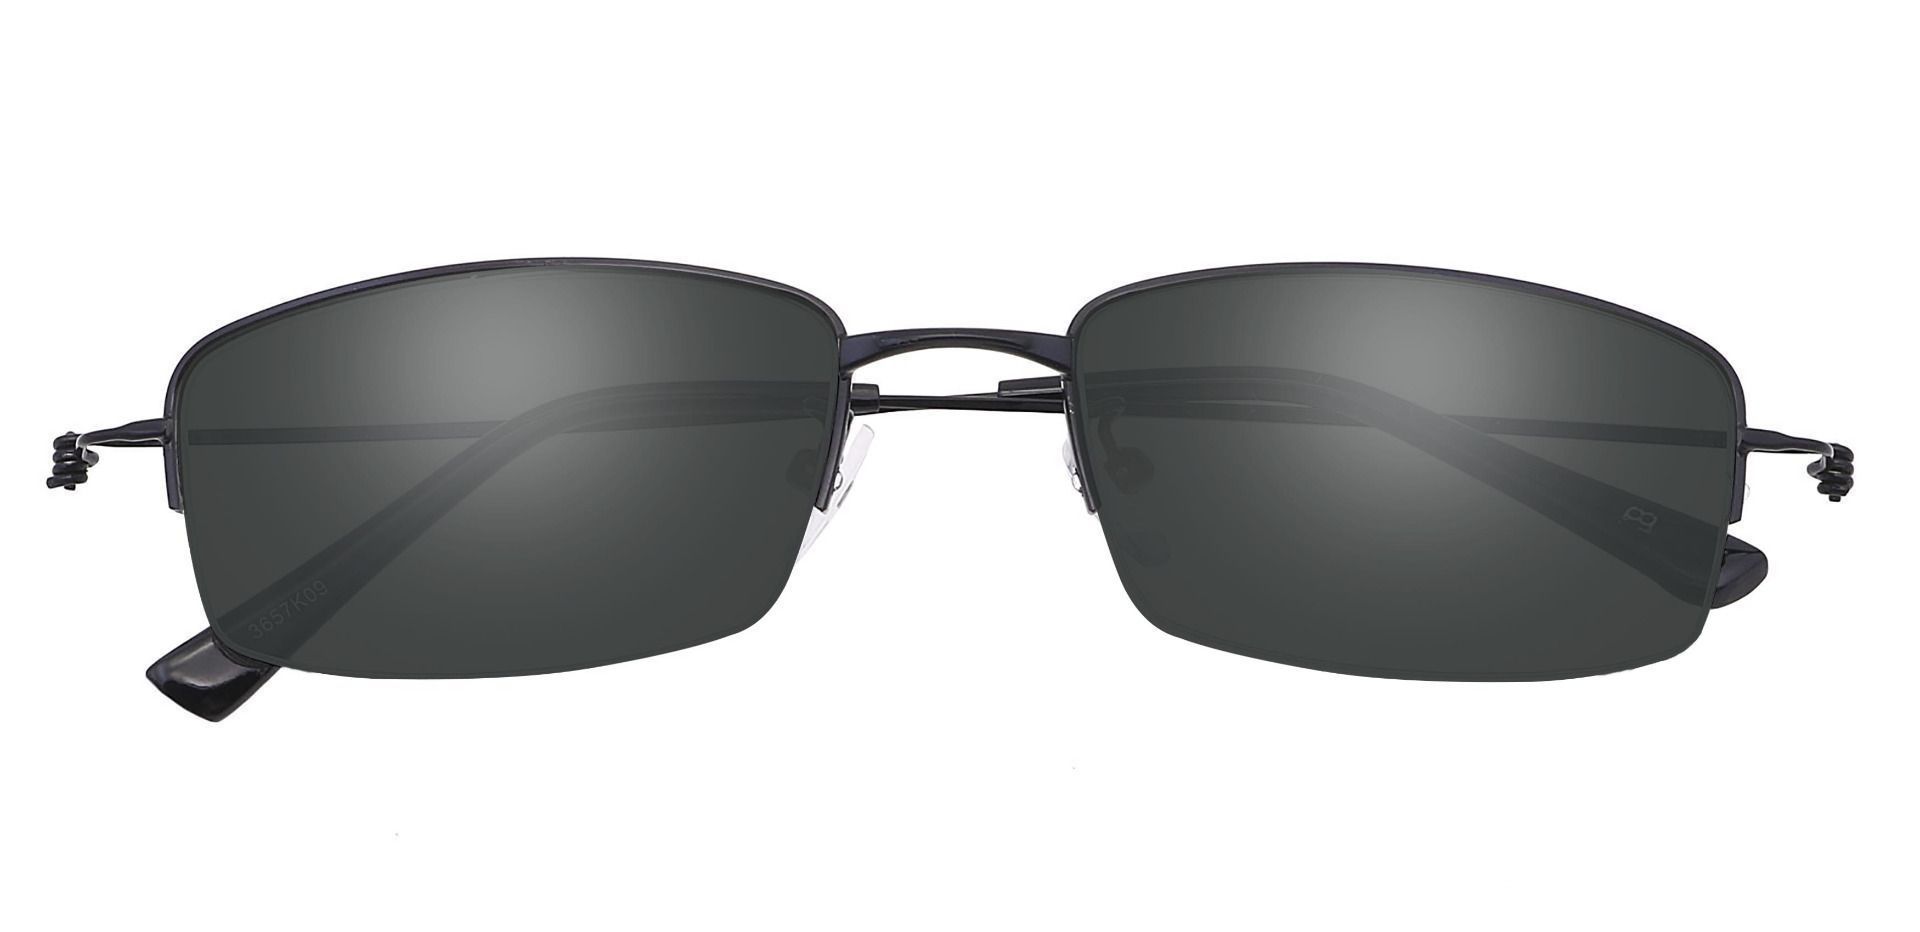 Wyoming Rectangle Non-Rx Sunglasses - Black Frame With Gray Lenses